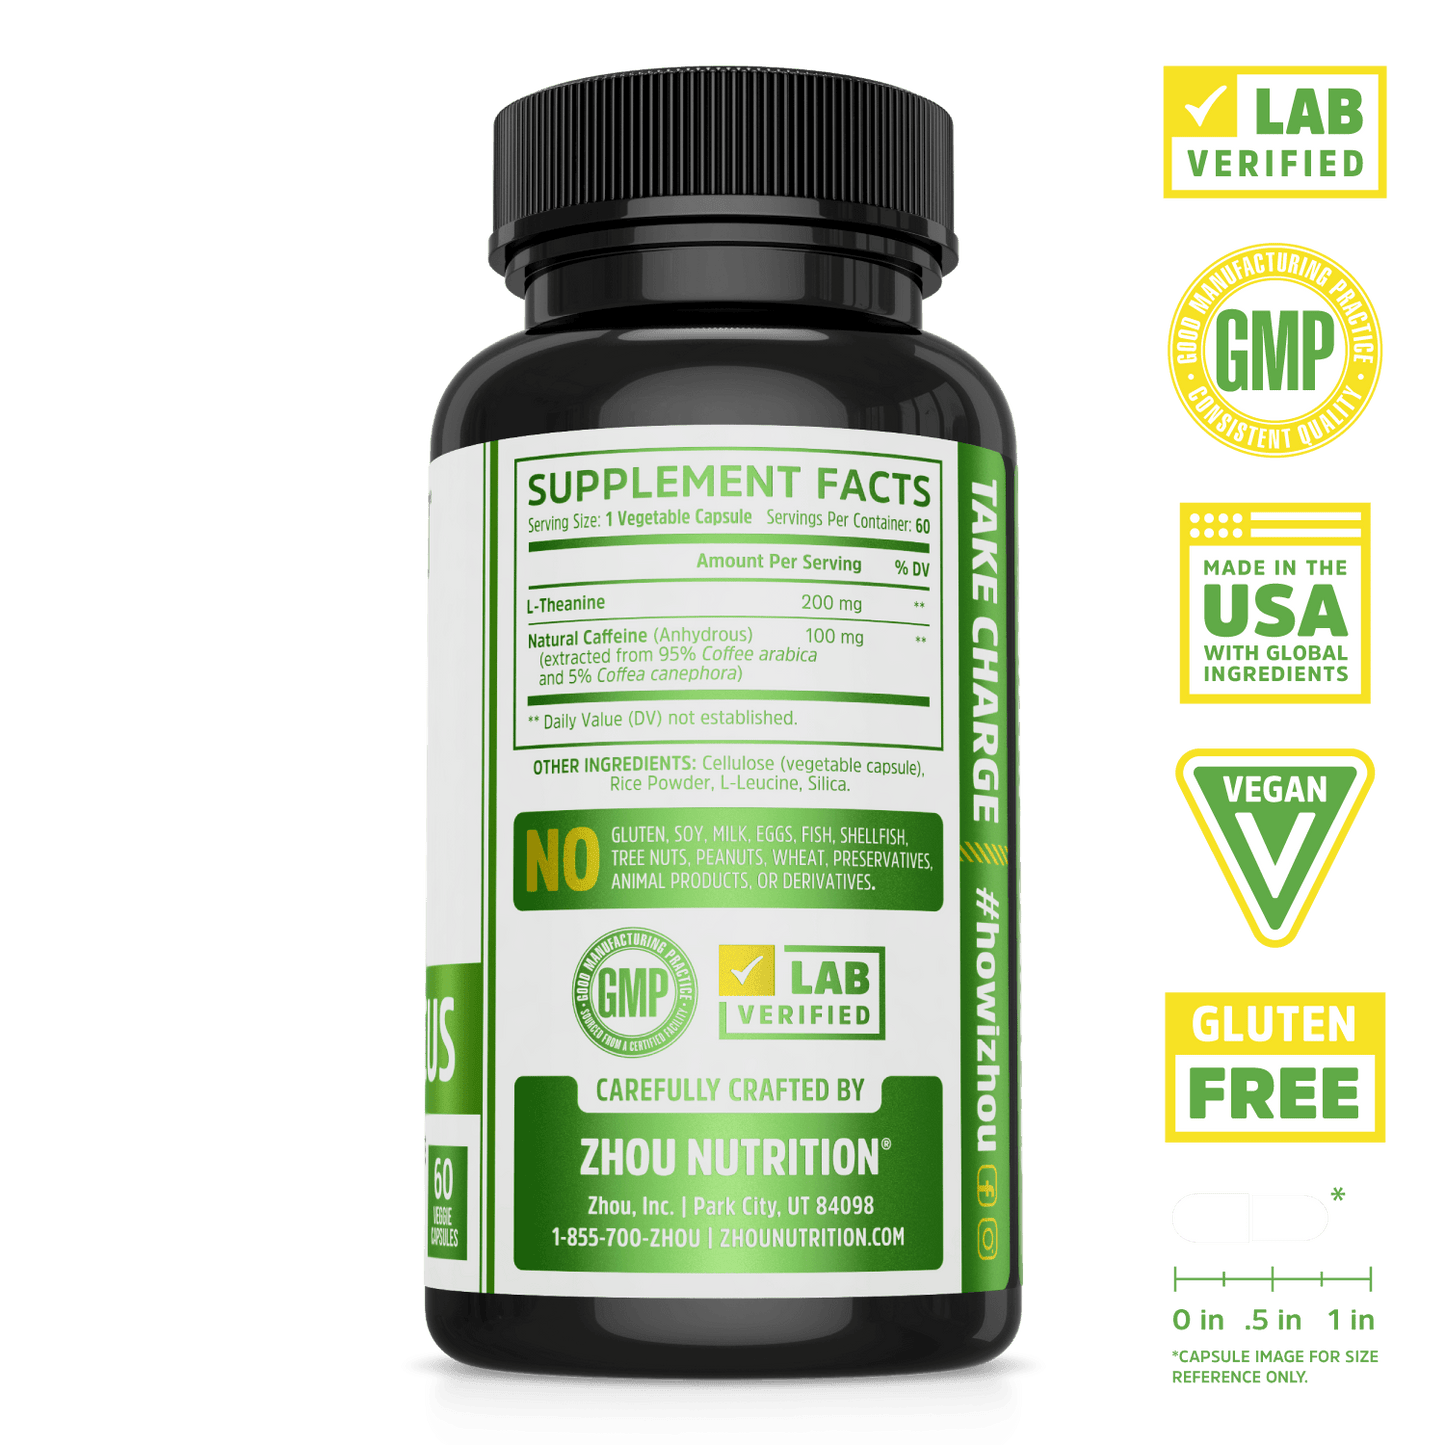 Energy + Focus Smooth and Focused Energy Supplement. Bottle side. Lab verified, good manufacturing practices, made in the USA with global ingredients, vegan, gluten free.